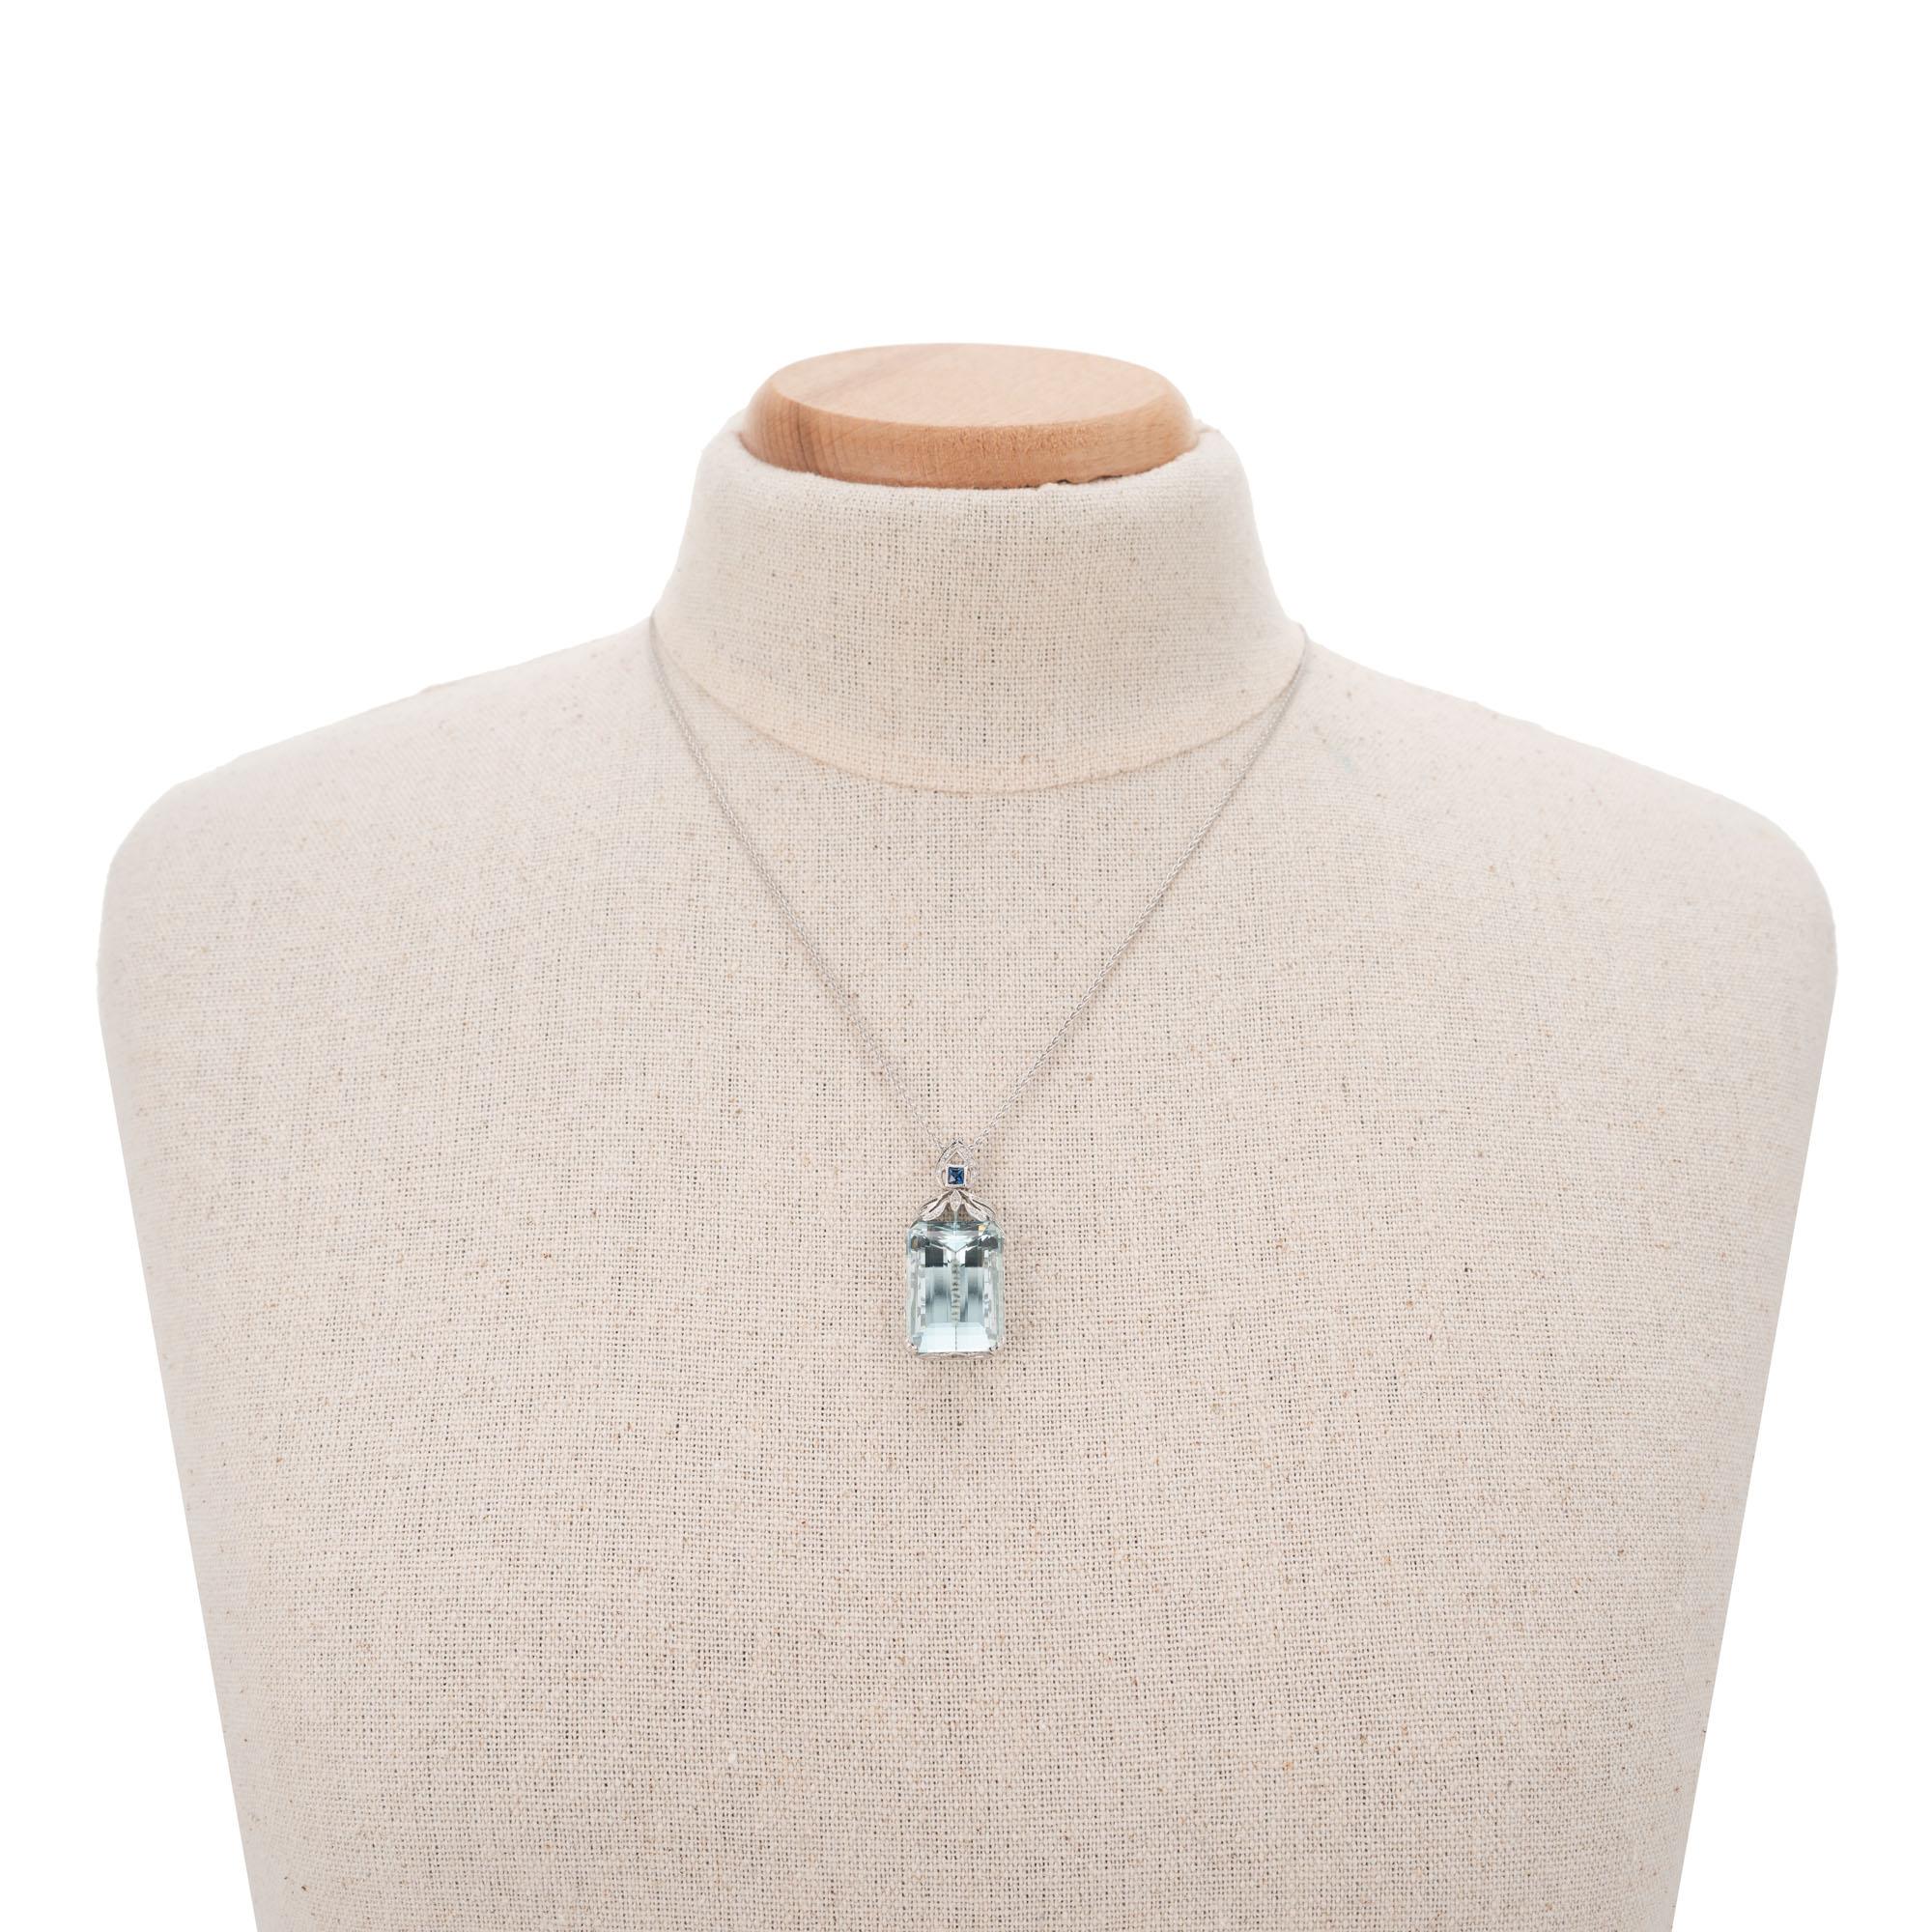 23.20 Carat French Cut Sapphire Aquamarine Diamond Platinum Pendant Necklace In Good Condition For Sale In Stamford, CT